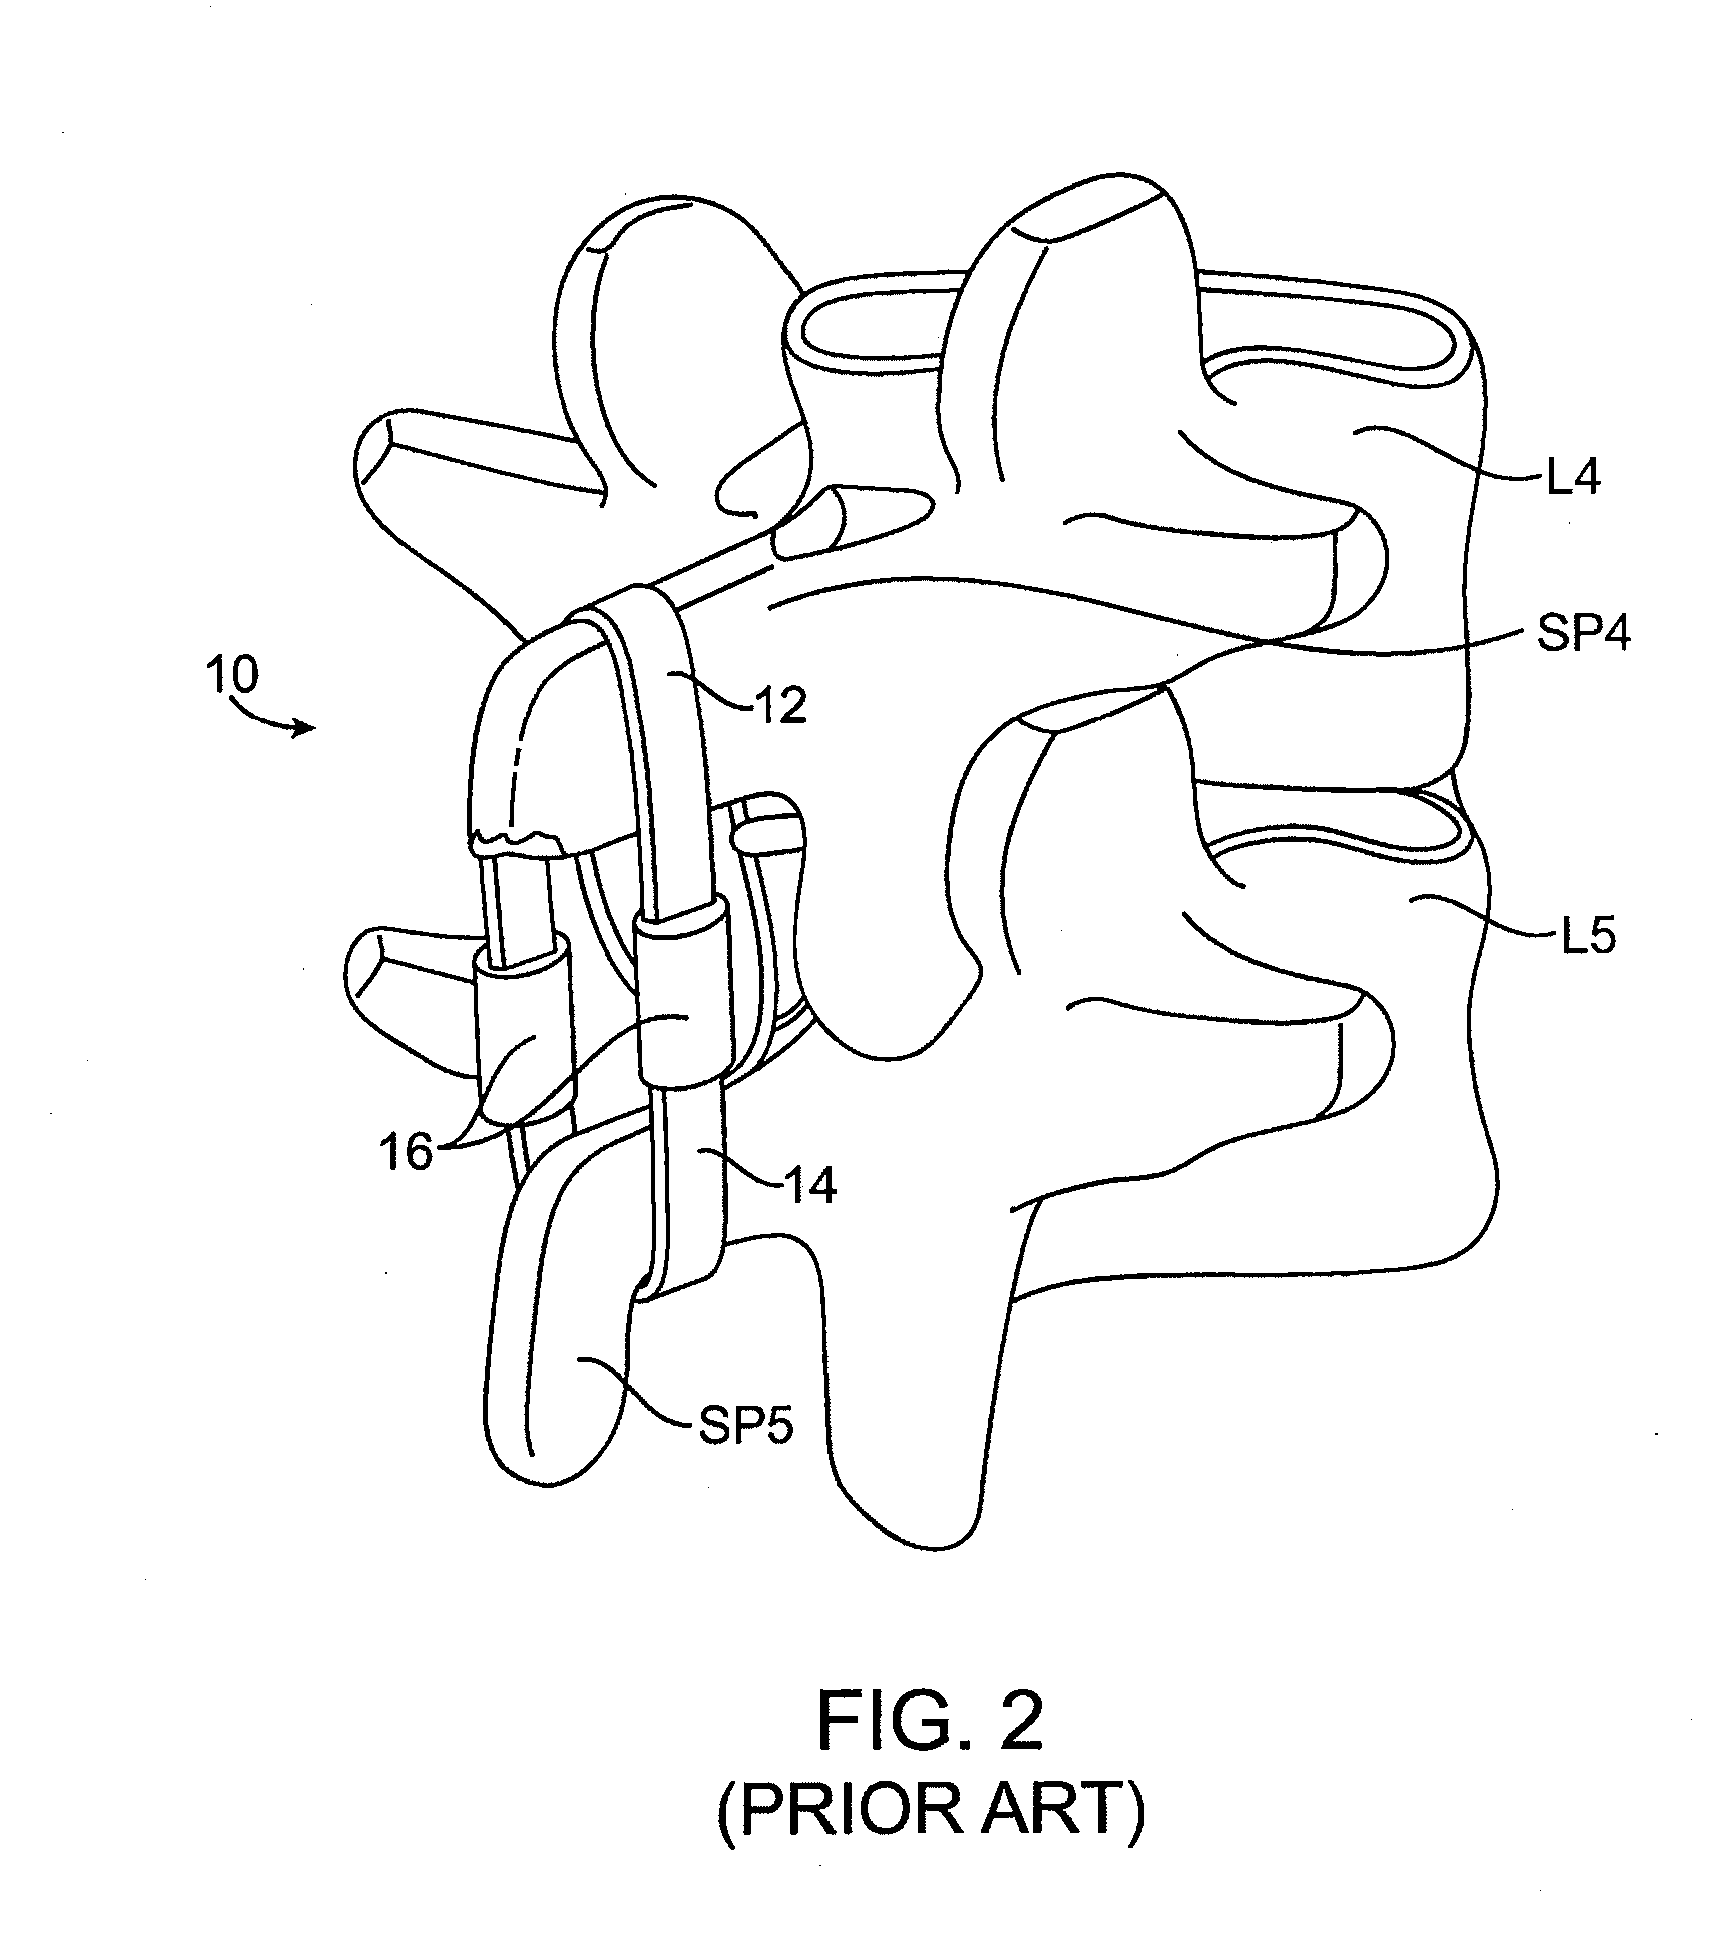 Structures and methods for constraining spinal processes with single connector